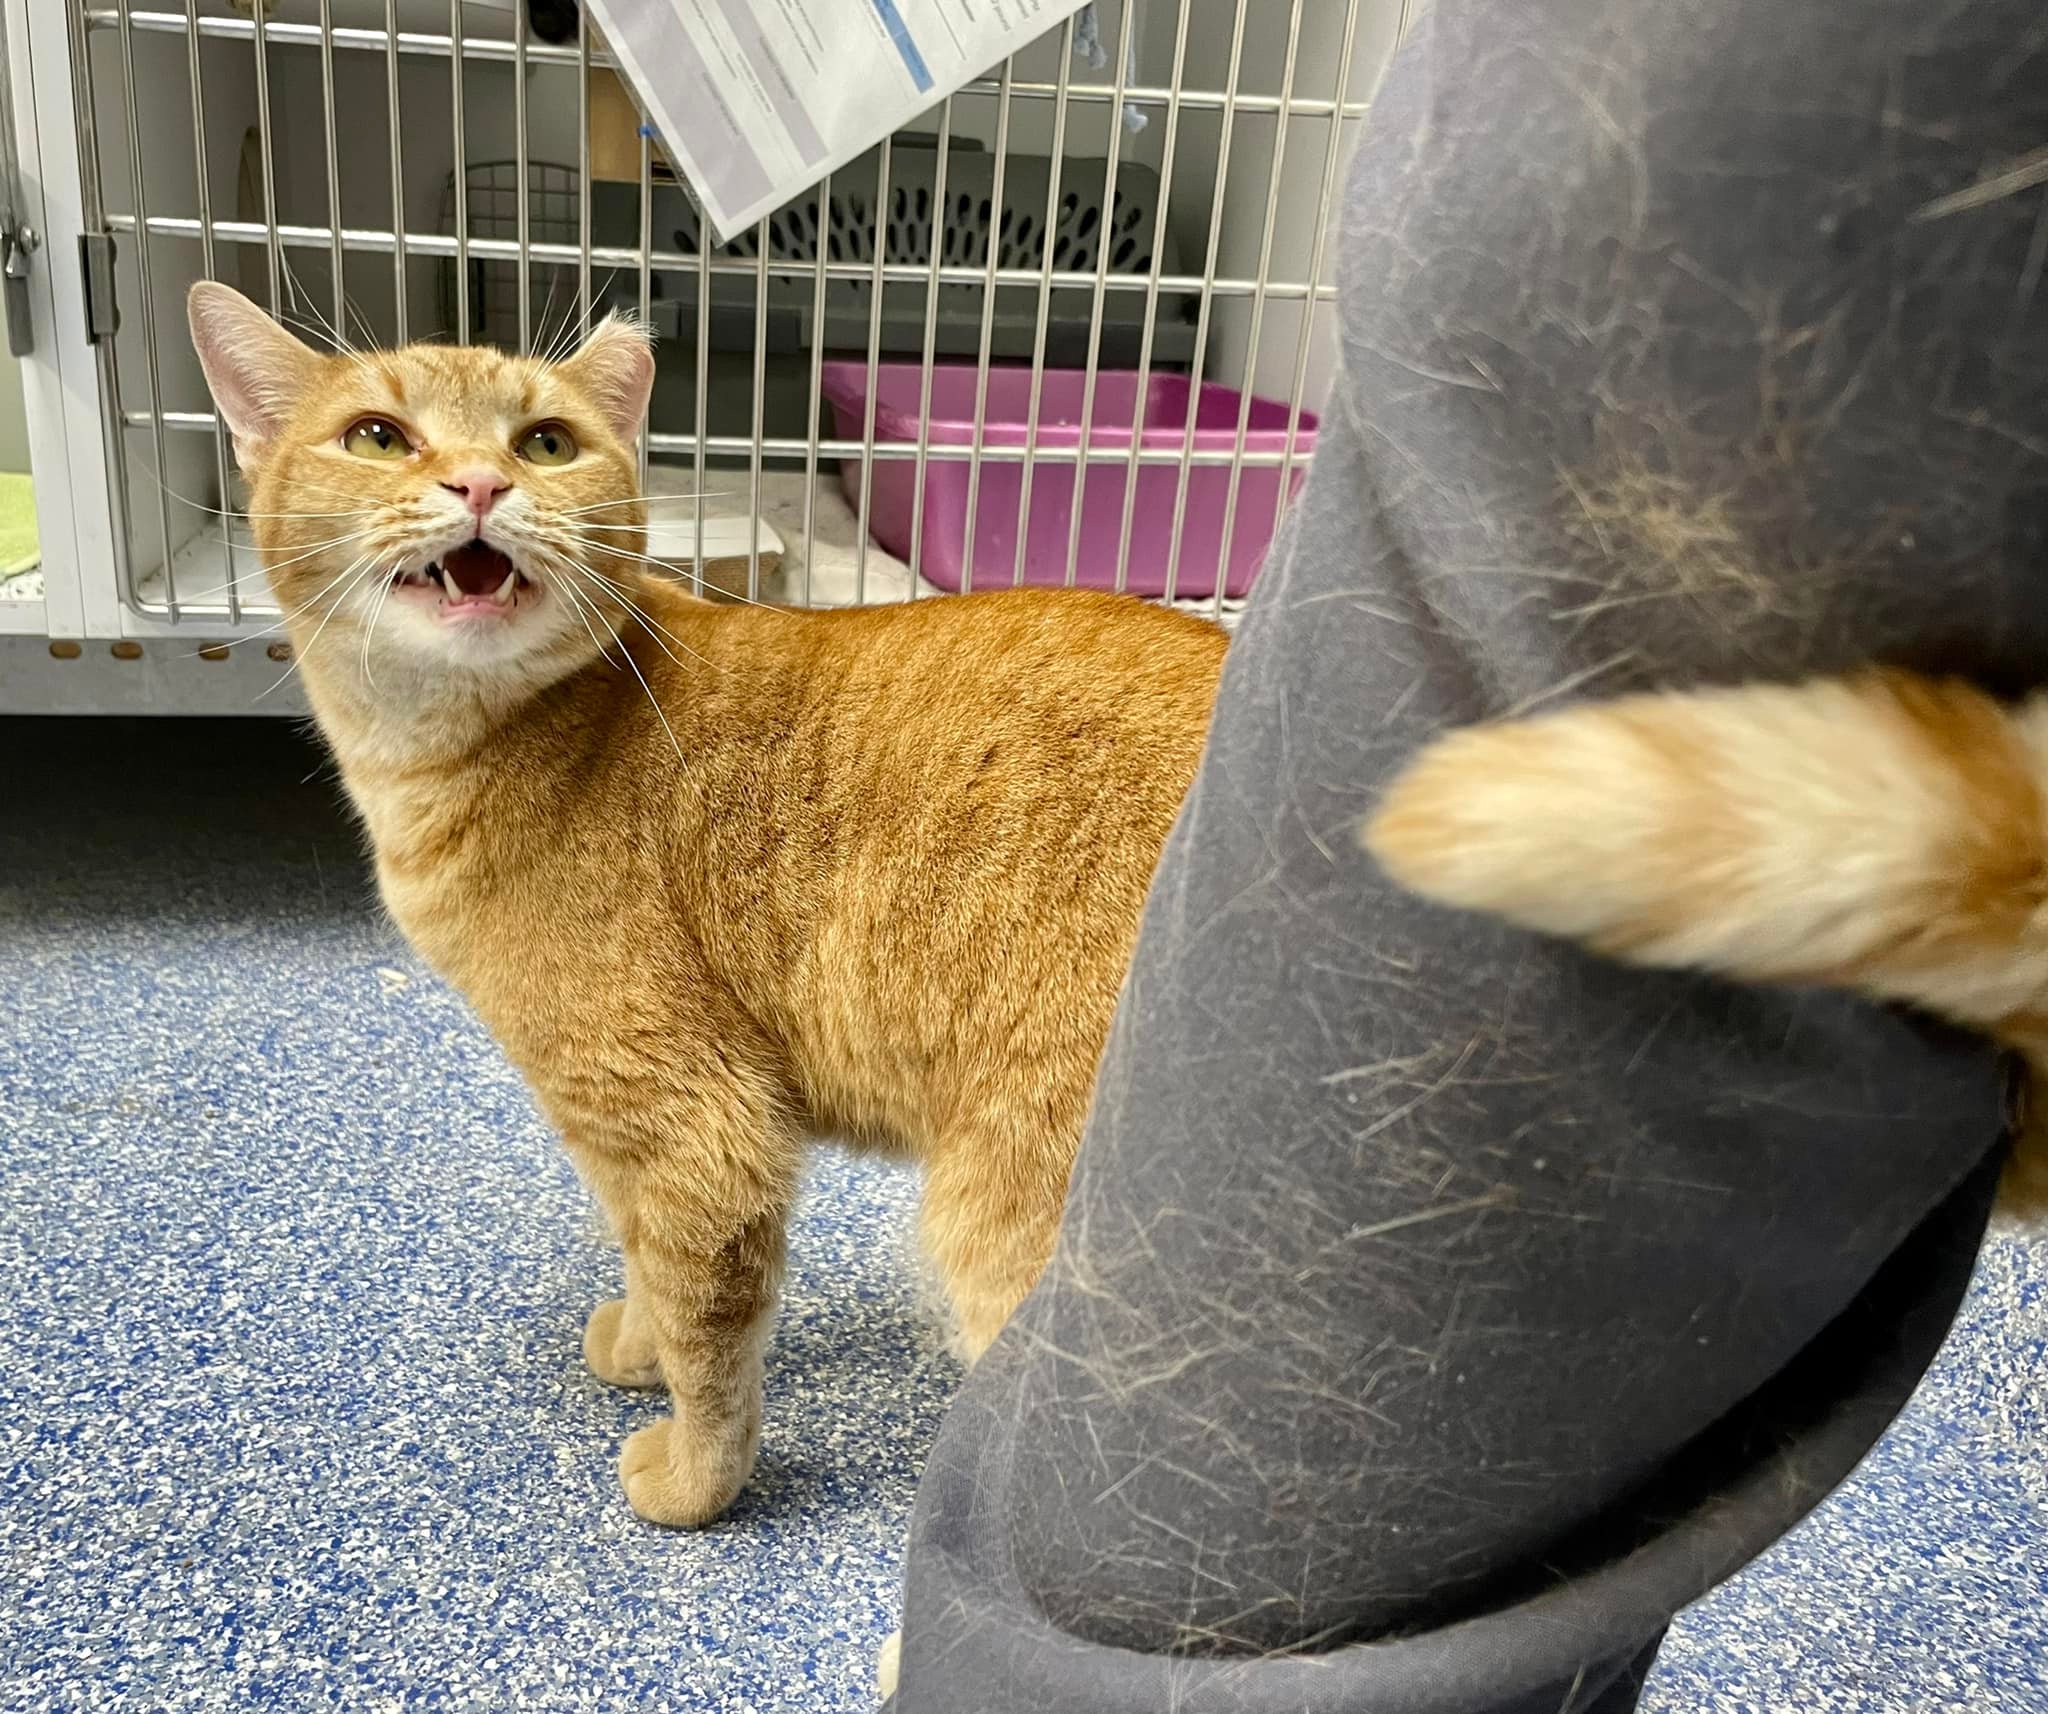 an orange tabby shelter cat mid-meow, enjoying some out-of-cage enrichment, while he wraps his tail around my pant leg, which is covered in his orange fur.